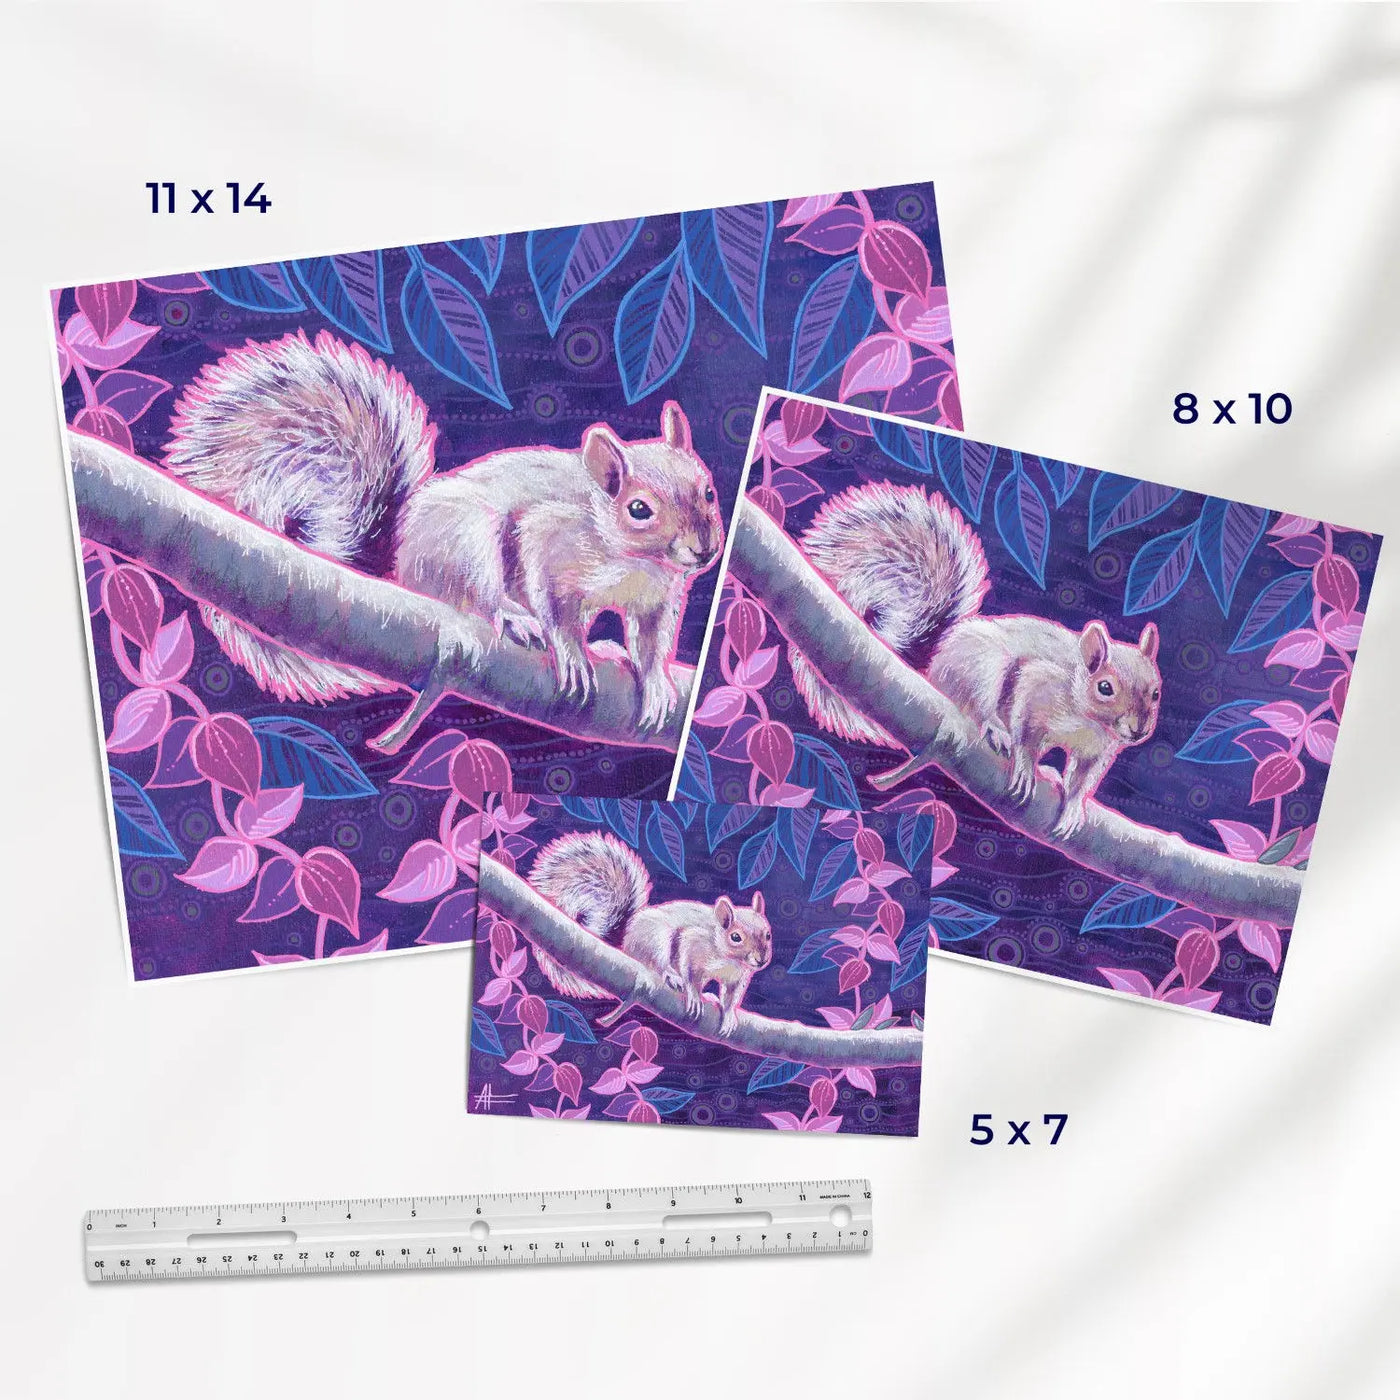 Set of three squirrel art prints, showcasing varying sizes with a purple and pink leafy motif.